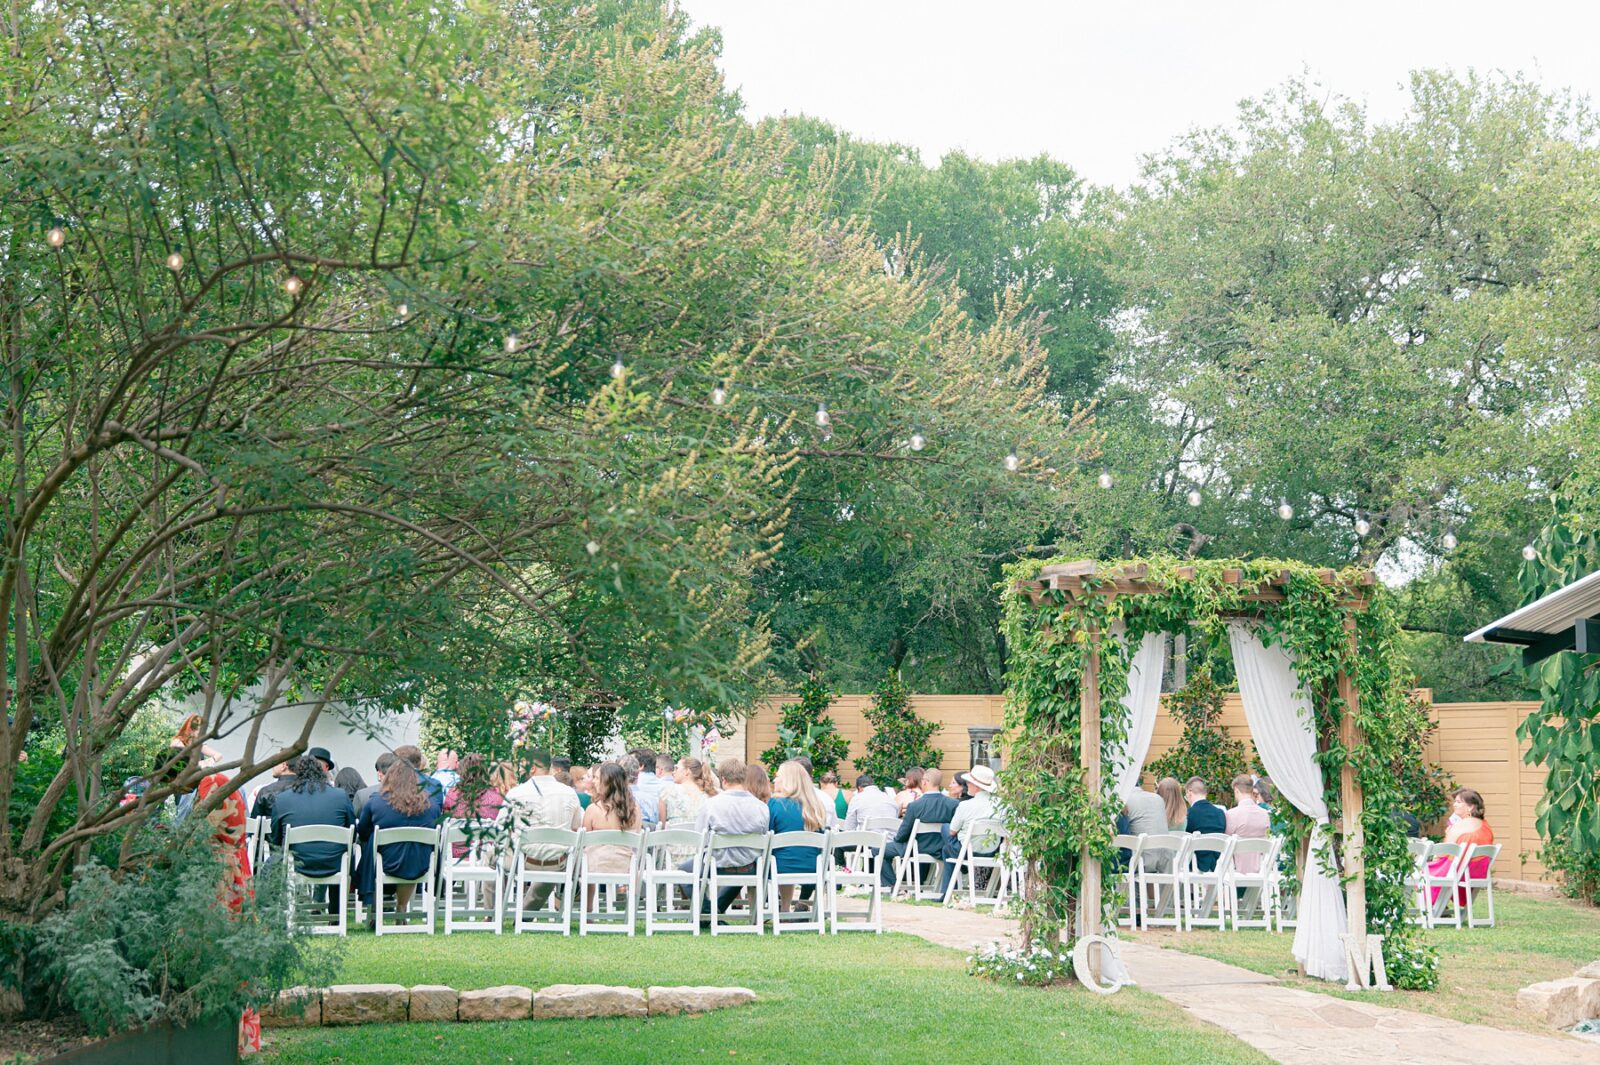 Summer wedding ceremony outside ceremony space at austin garden wedding venue, Austin Wedding at Hummingbird House, with wedding photos by Tara Lyons Photography. Other vendors: Mistique Makeup, Cana Events, Twin Flame Events, Simply Chic Event Rentals, Live Oak Photo Booth